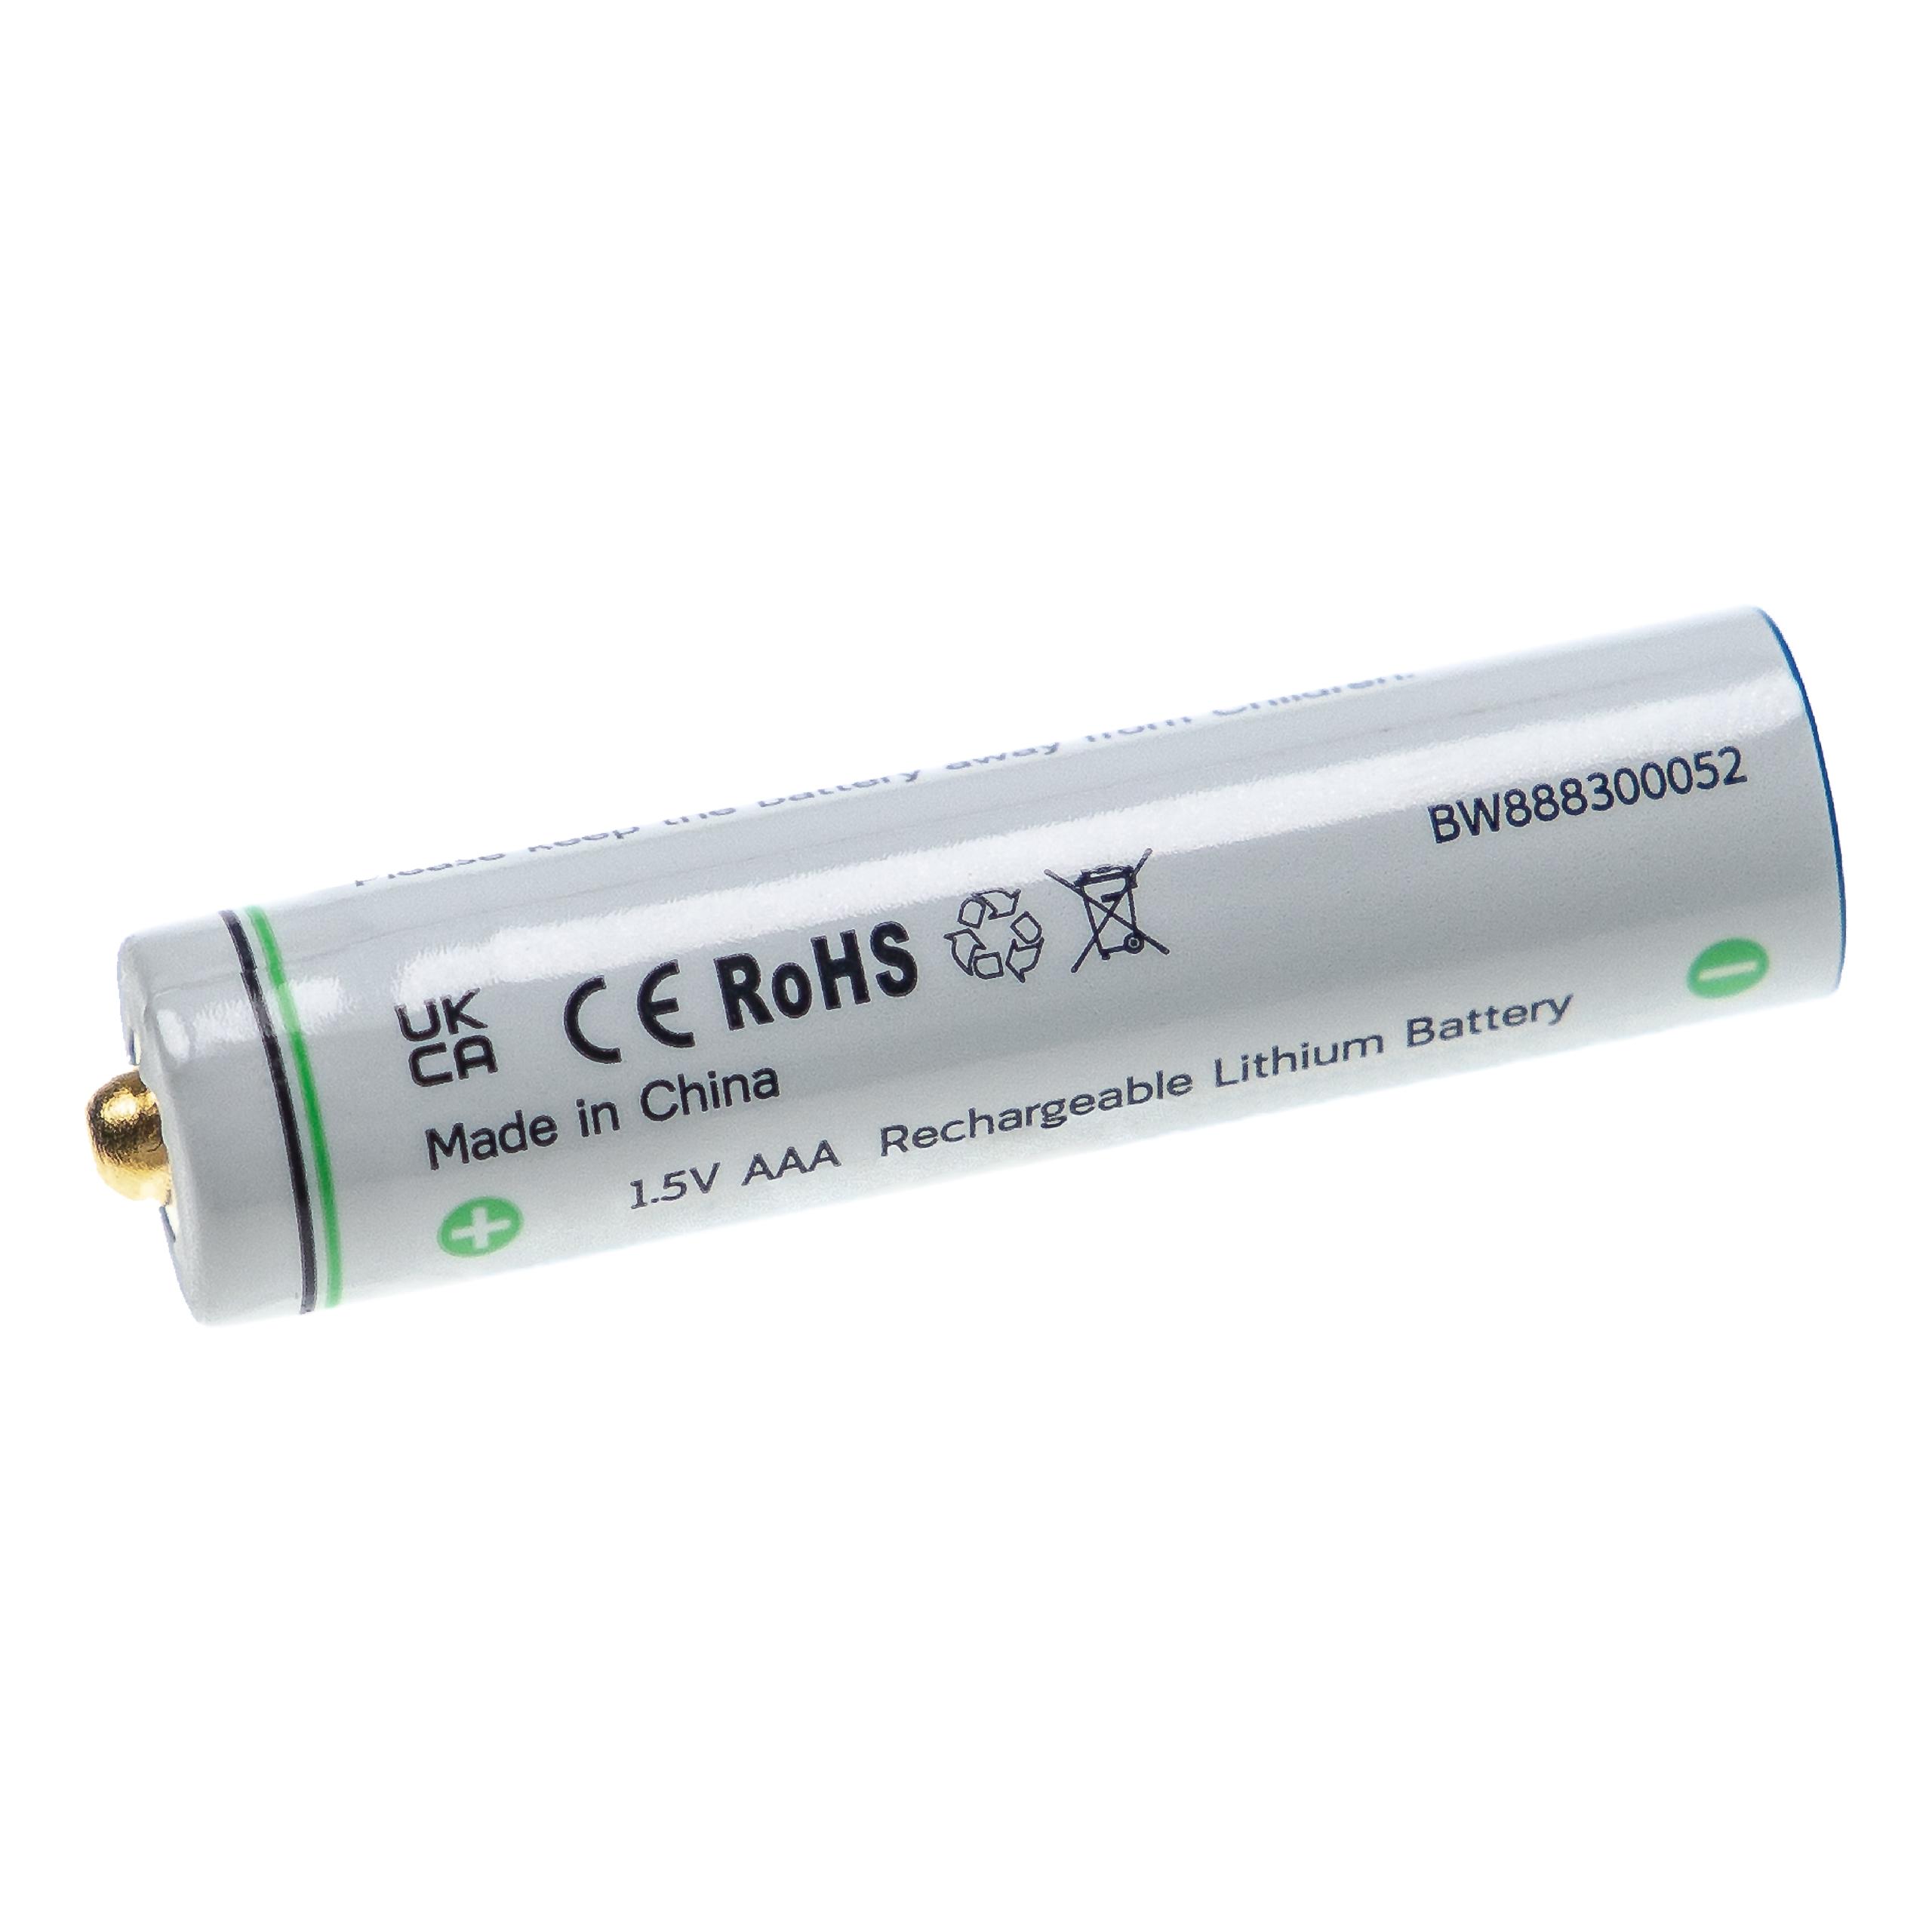 AAA Micro Replacement Battery for Use in Various Devices - 280mAh 1.5V Li-Ion